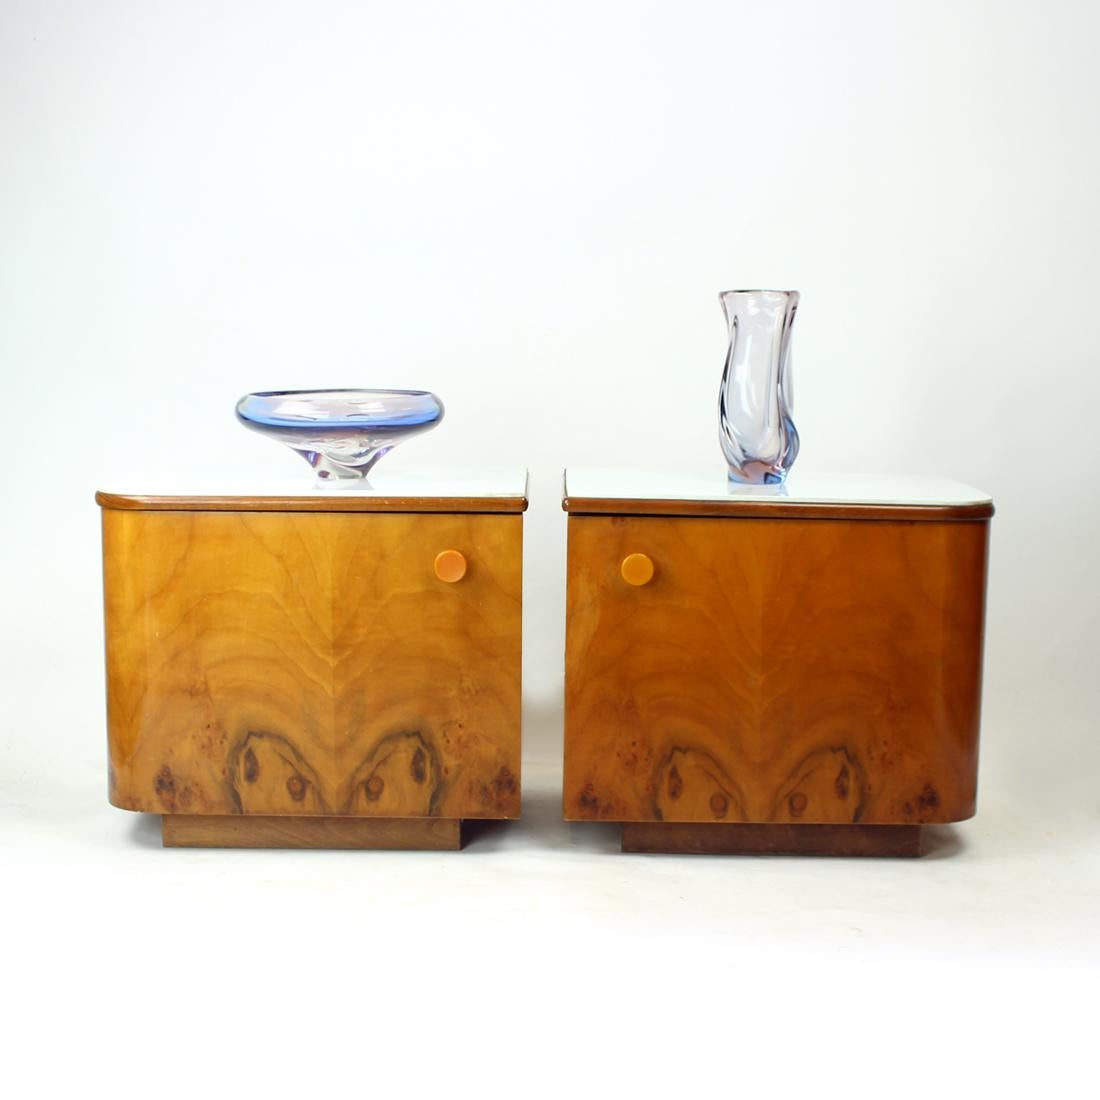 1960s Bedside Tables In Walnut And White Glass, Czechoslovakia In Good Condition For Sale In Zohor, SK